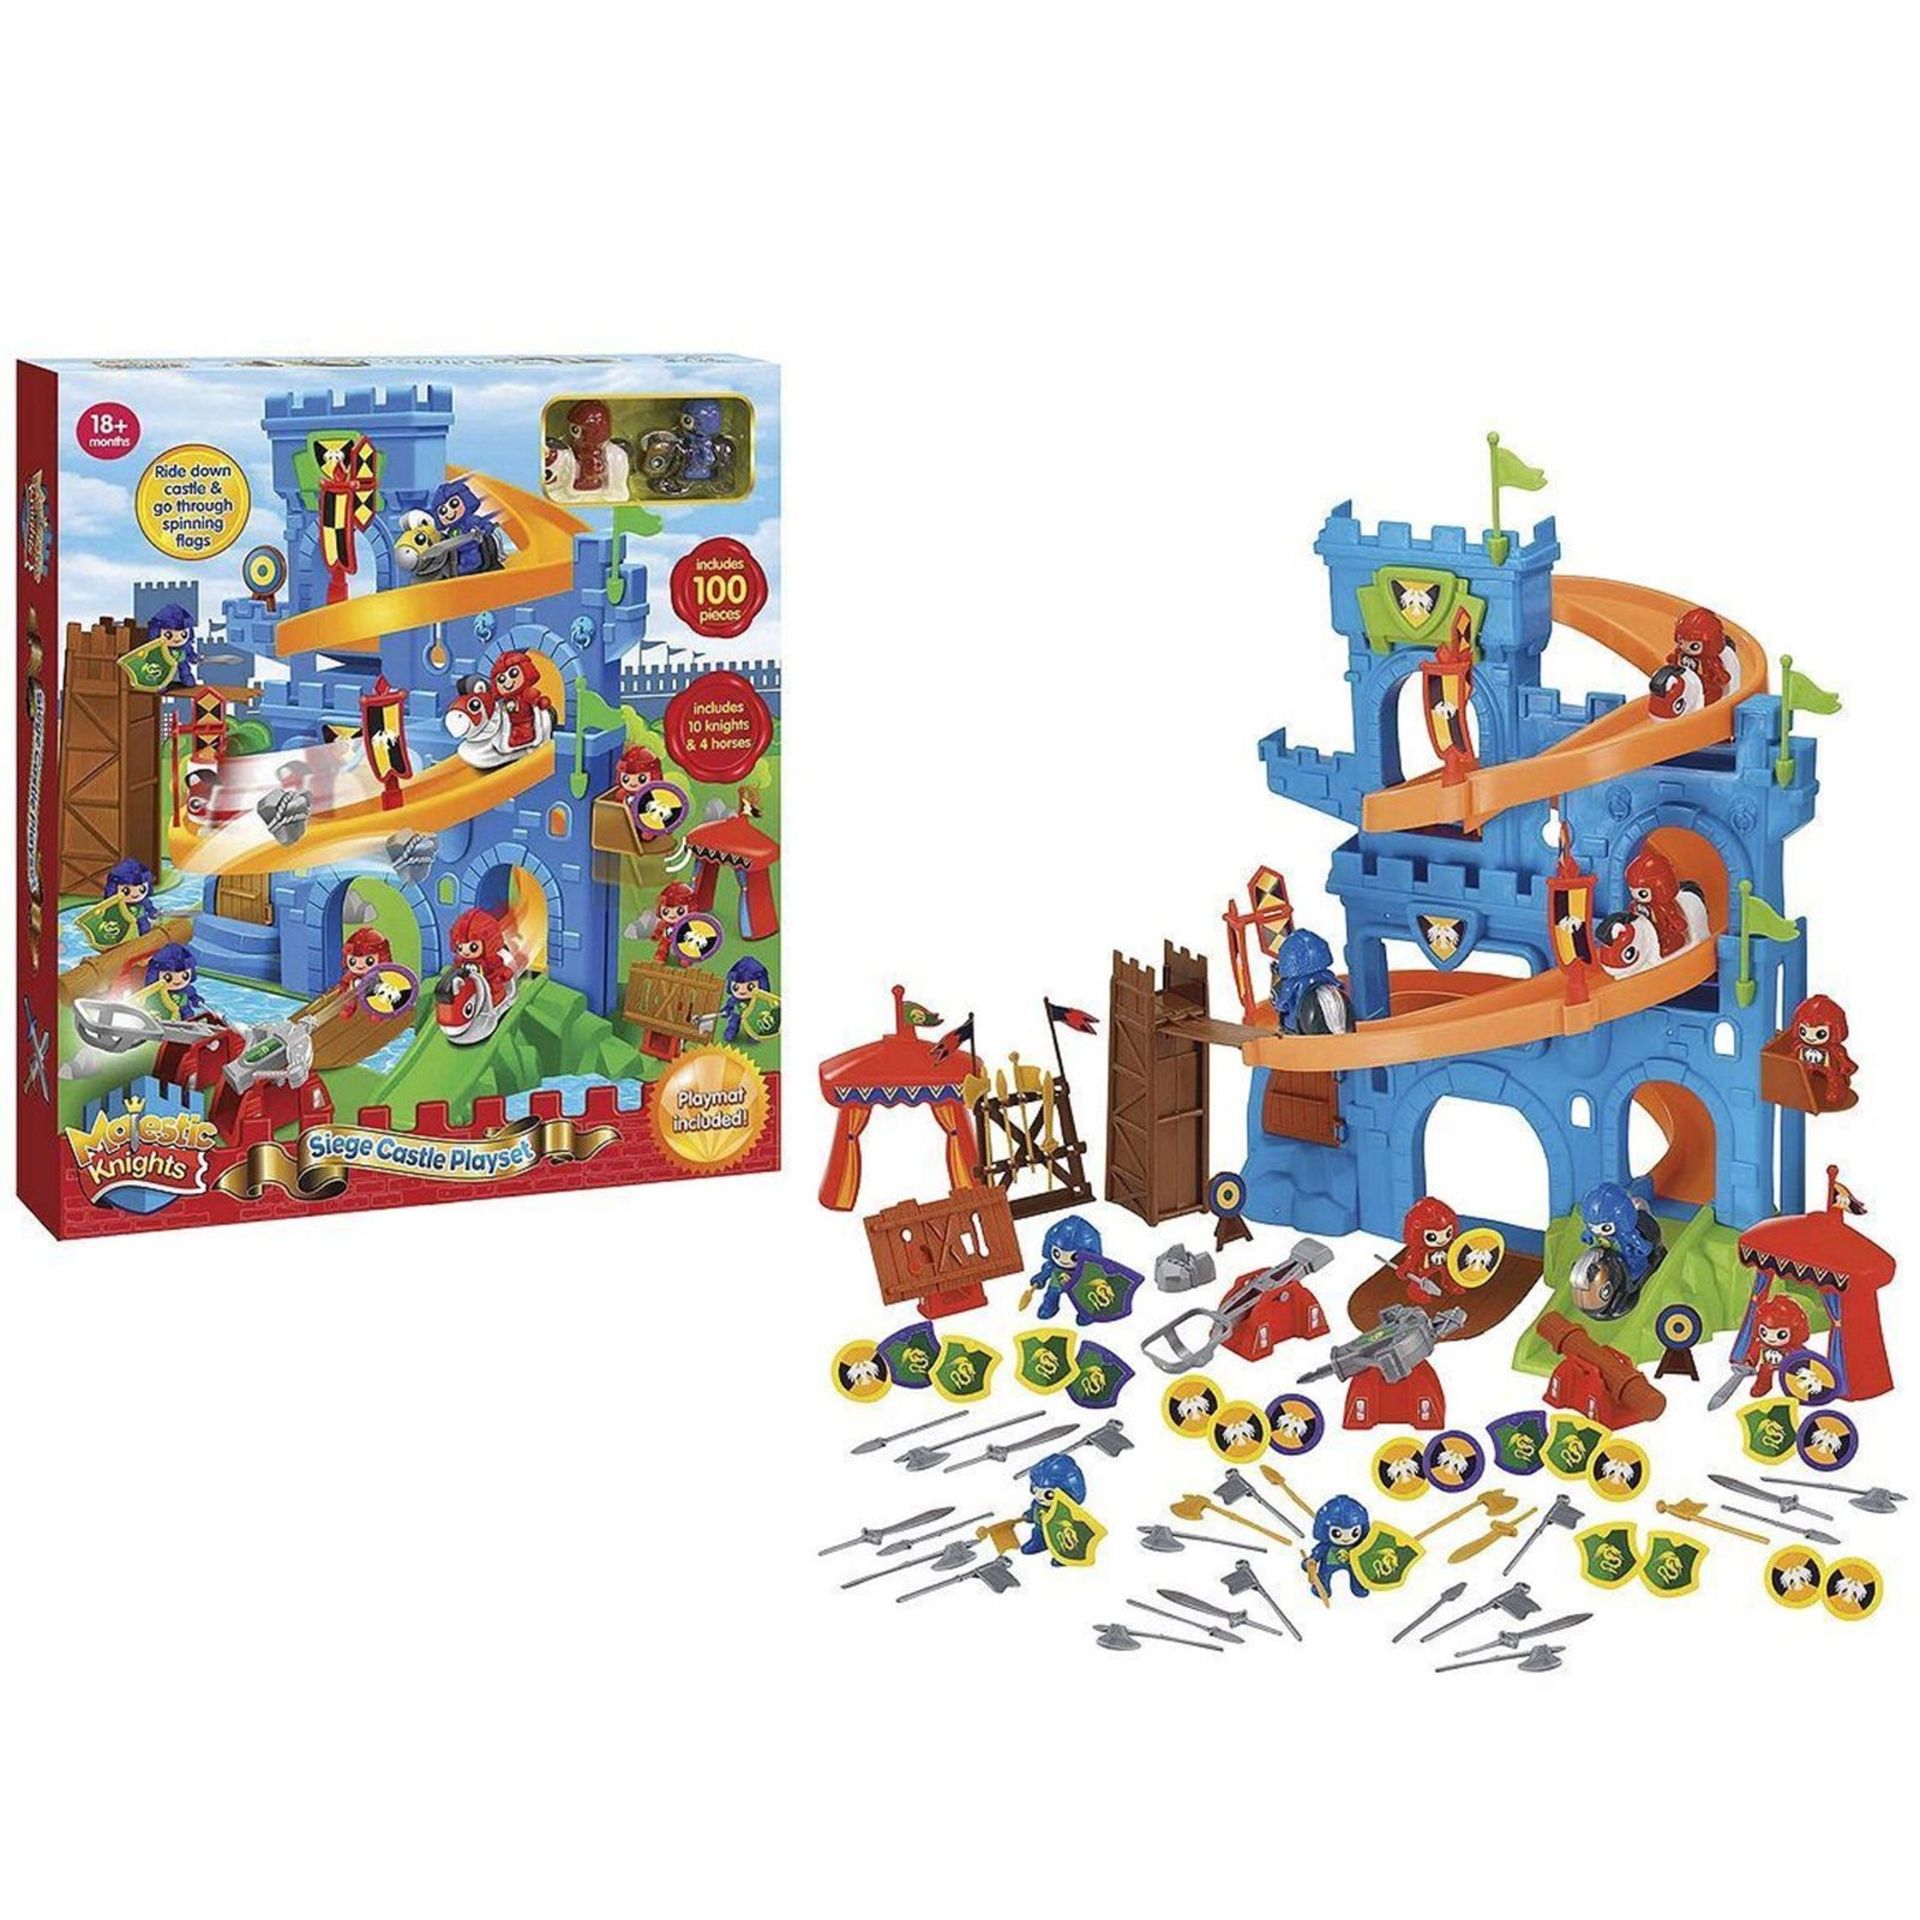 V Brand New Majestic Knights 100 Piece Siege Castle Playset - Includes 10 Knights And Four Horses - Image 2 of 2